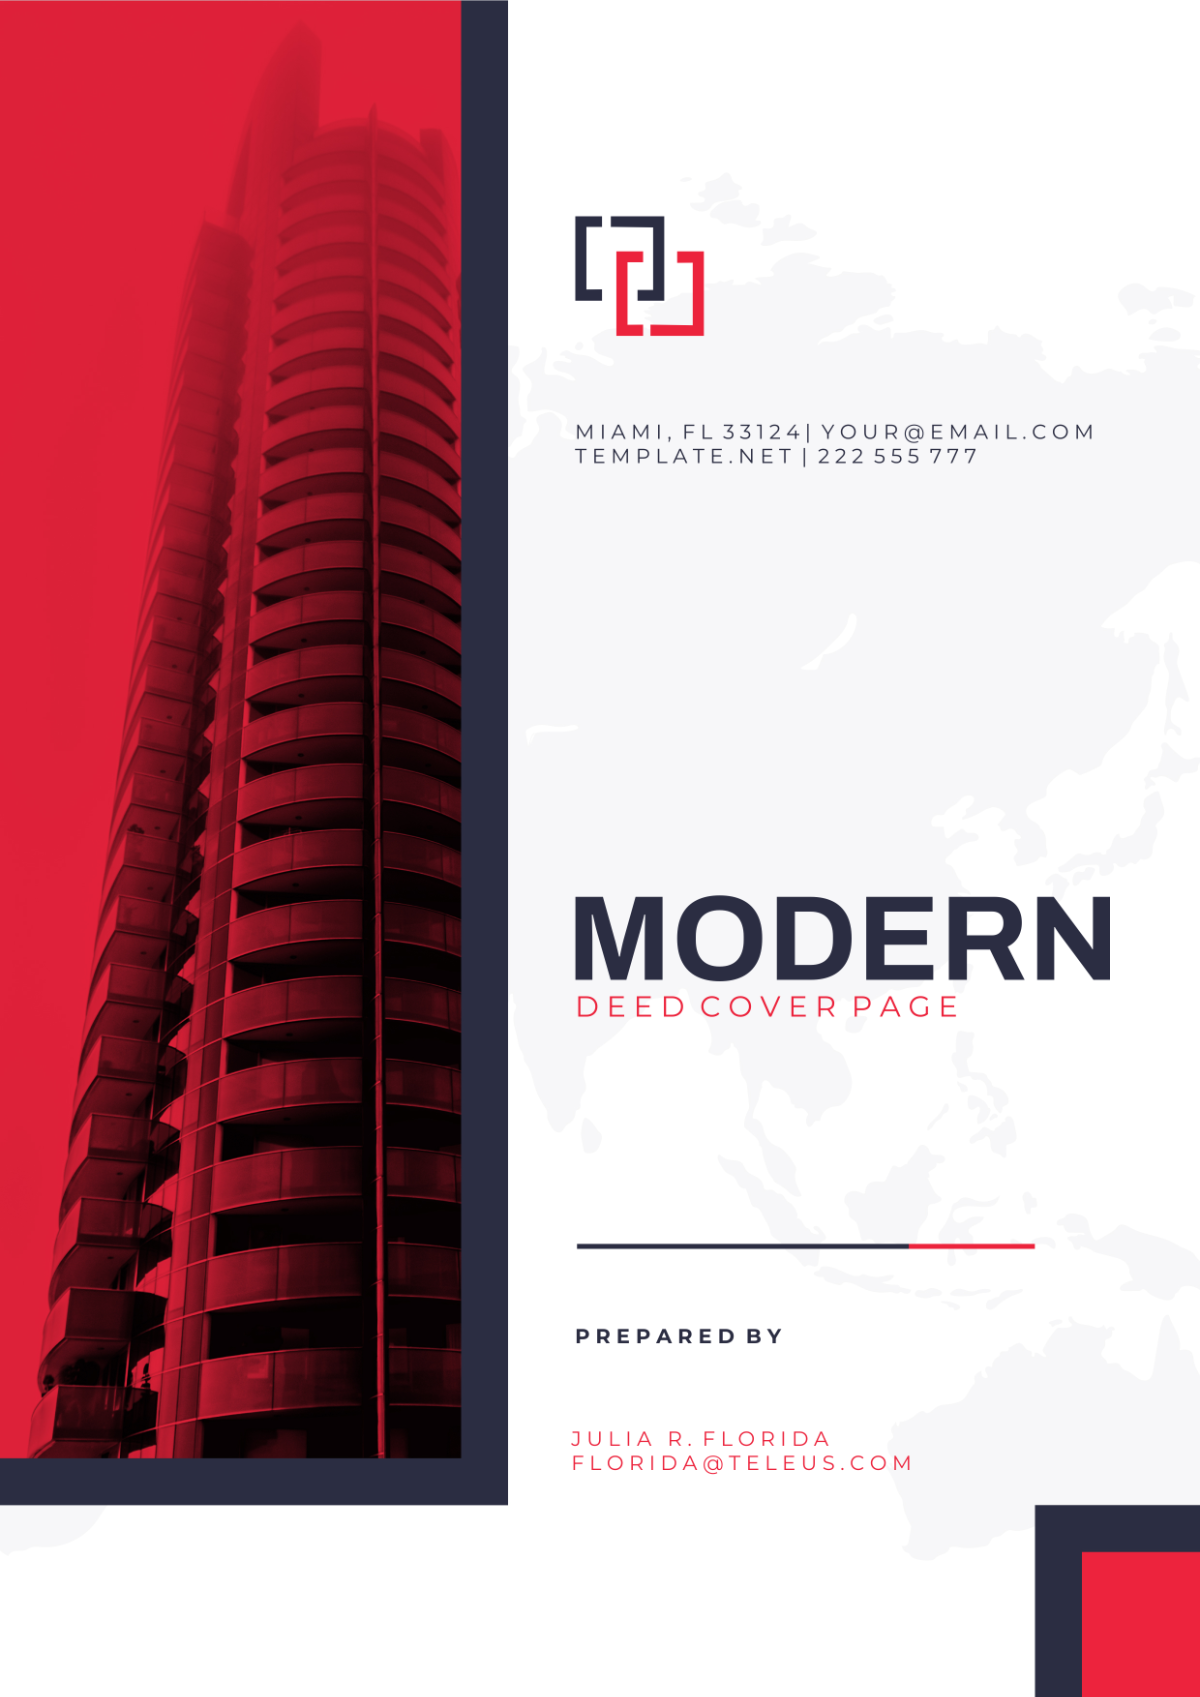 Modern Deed Cover Page